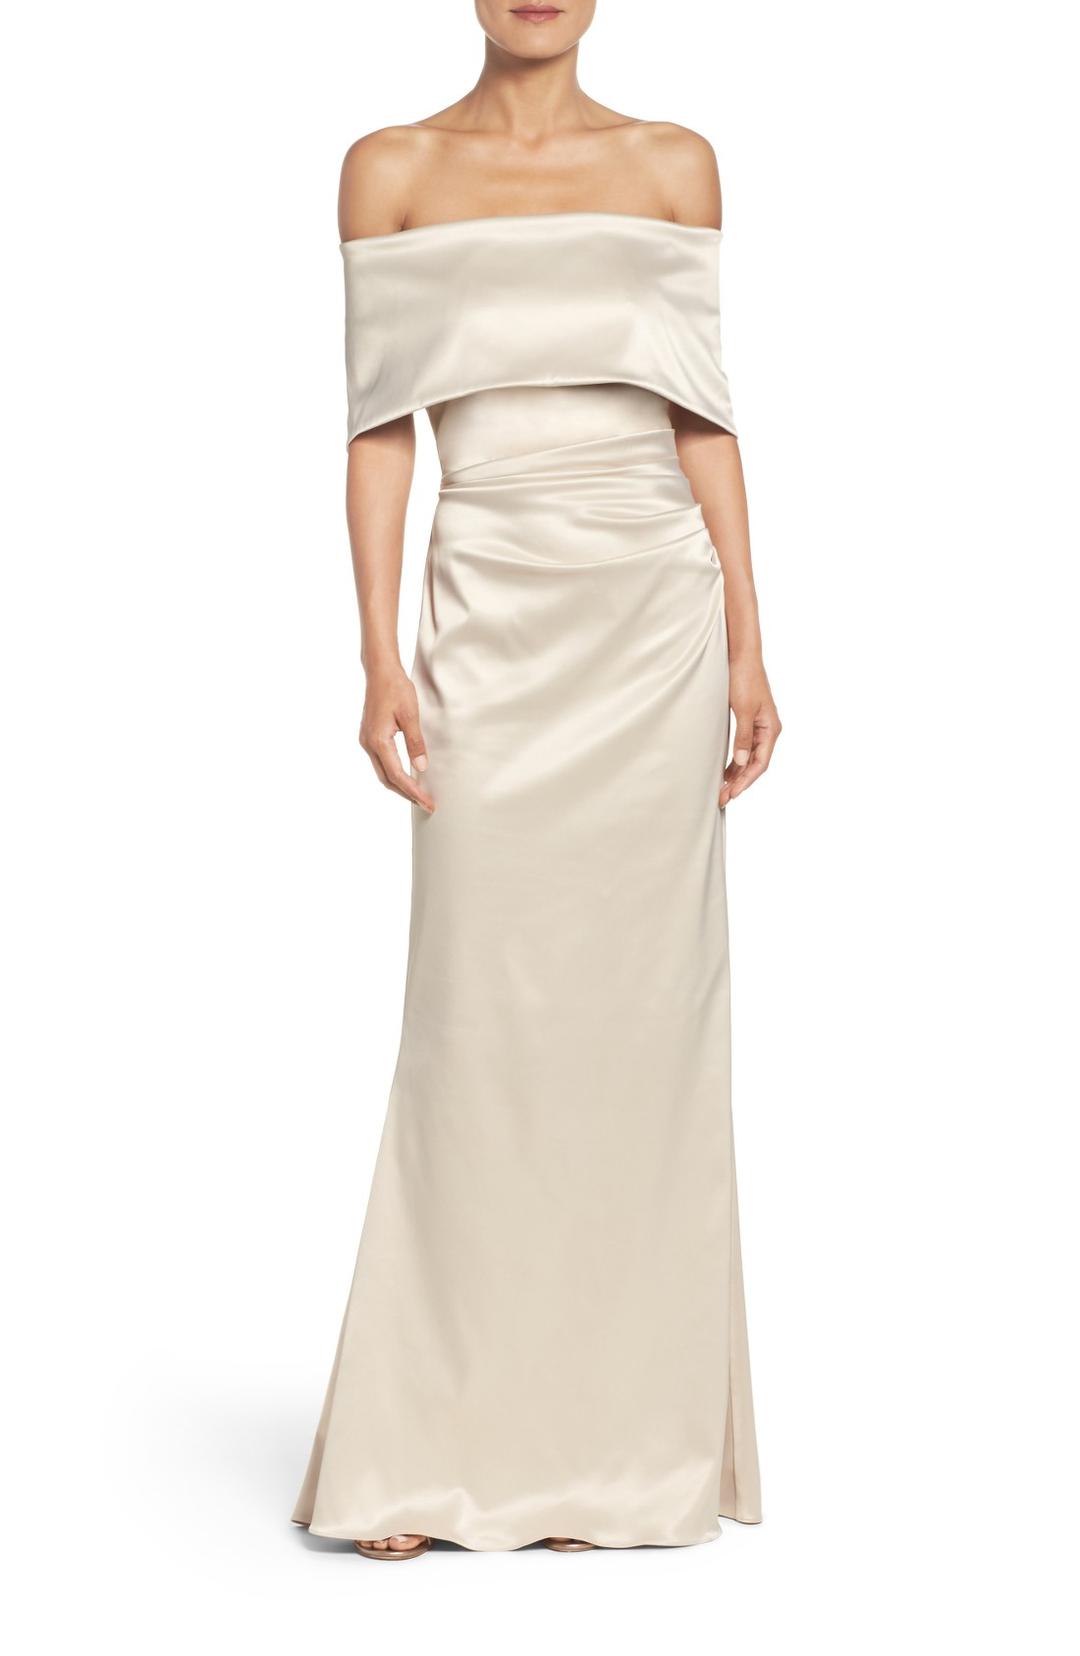 champagne colored gowns with sleeves